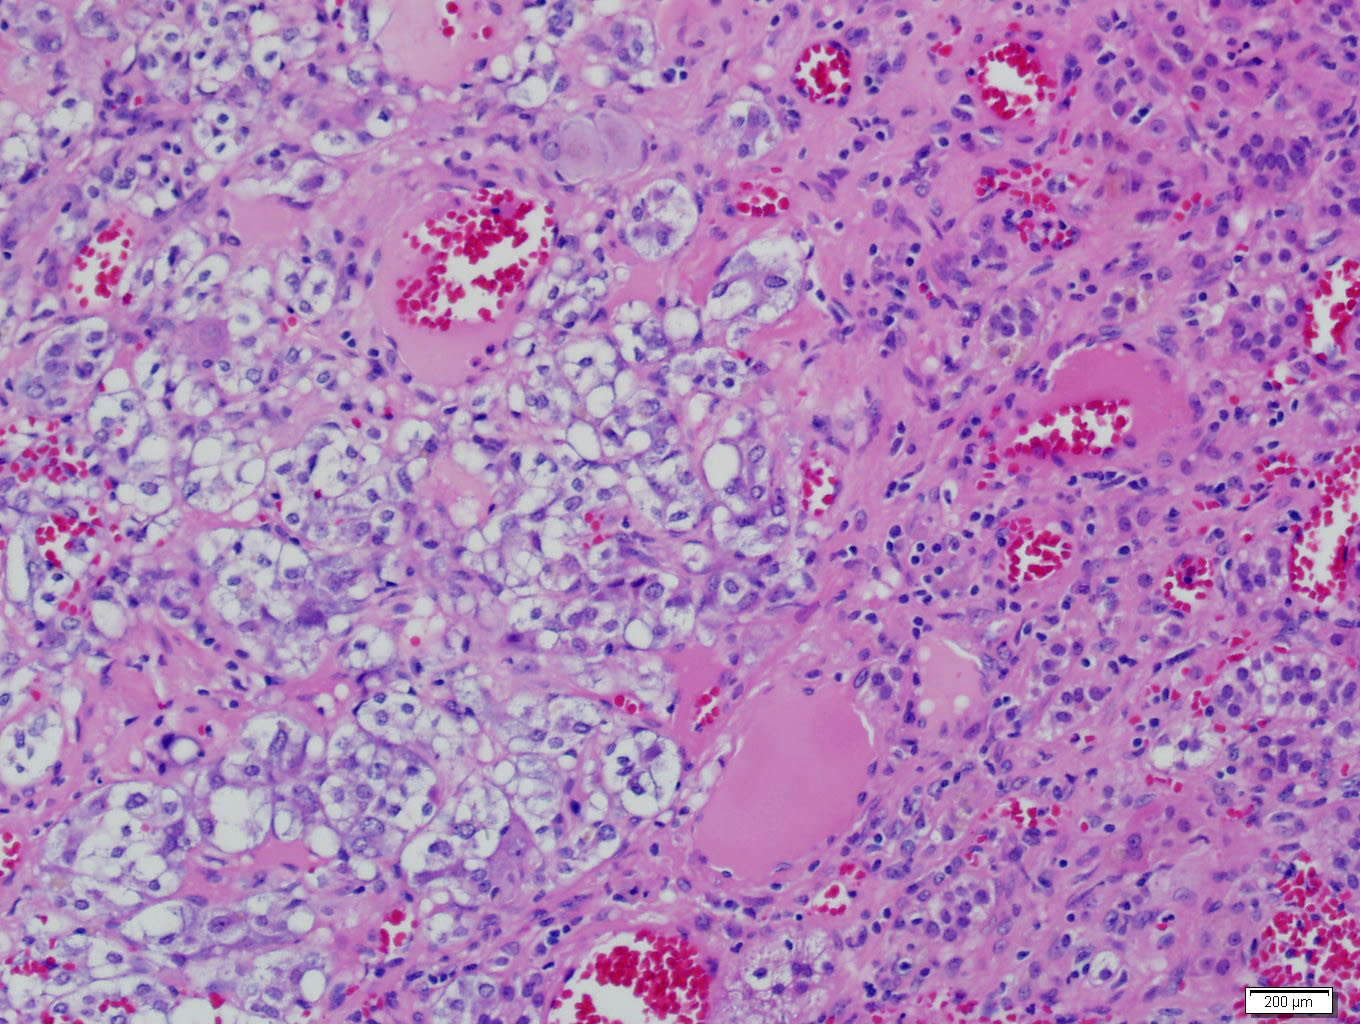 Adrenal metastasis from clear cell renal cell carcinoma